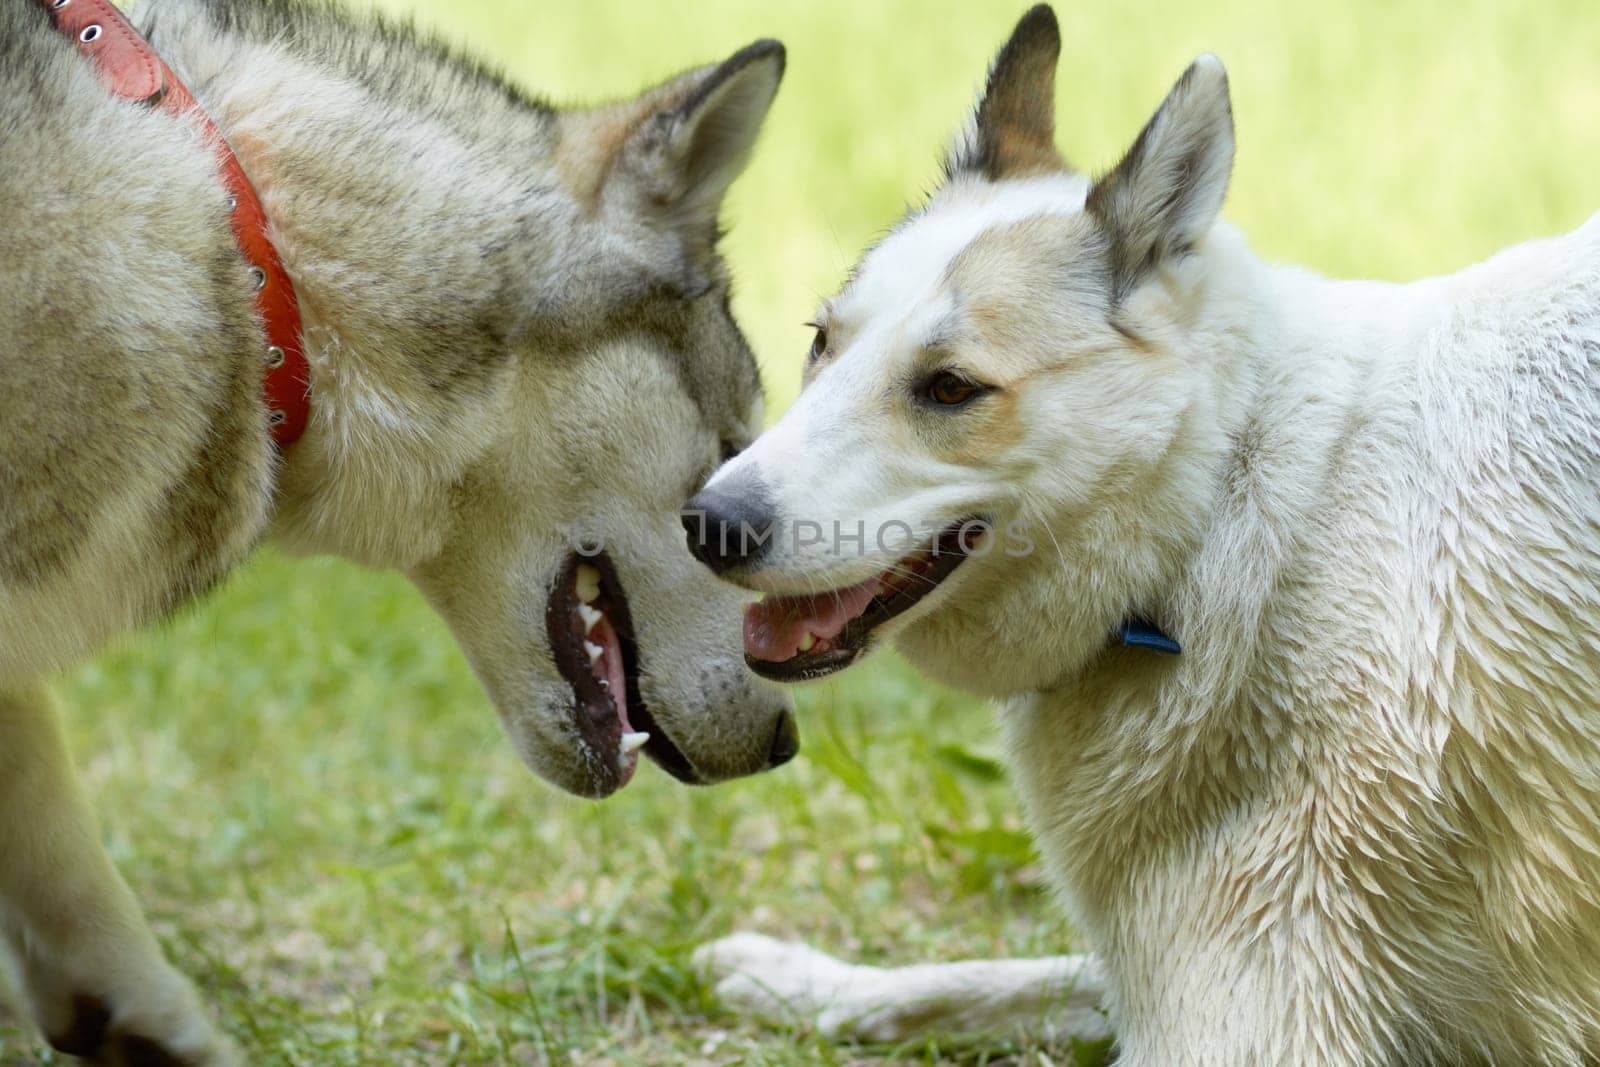 Dogs, play and park with animal meeting on grass in summer together with pet. Nature, dog and husky friends outdoor on a field with puppy, animals and pets on a lawn feeling happy in countryside.